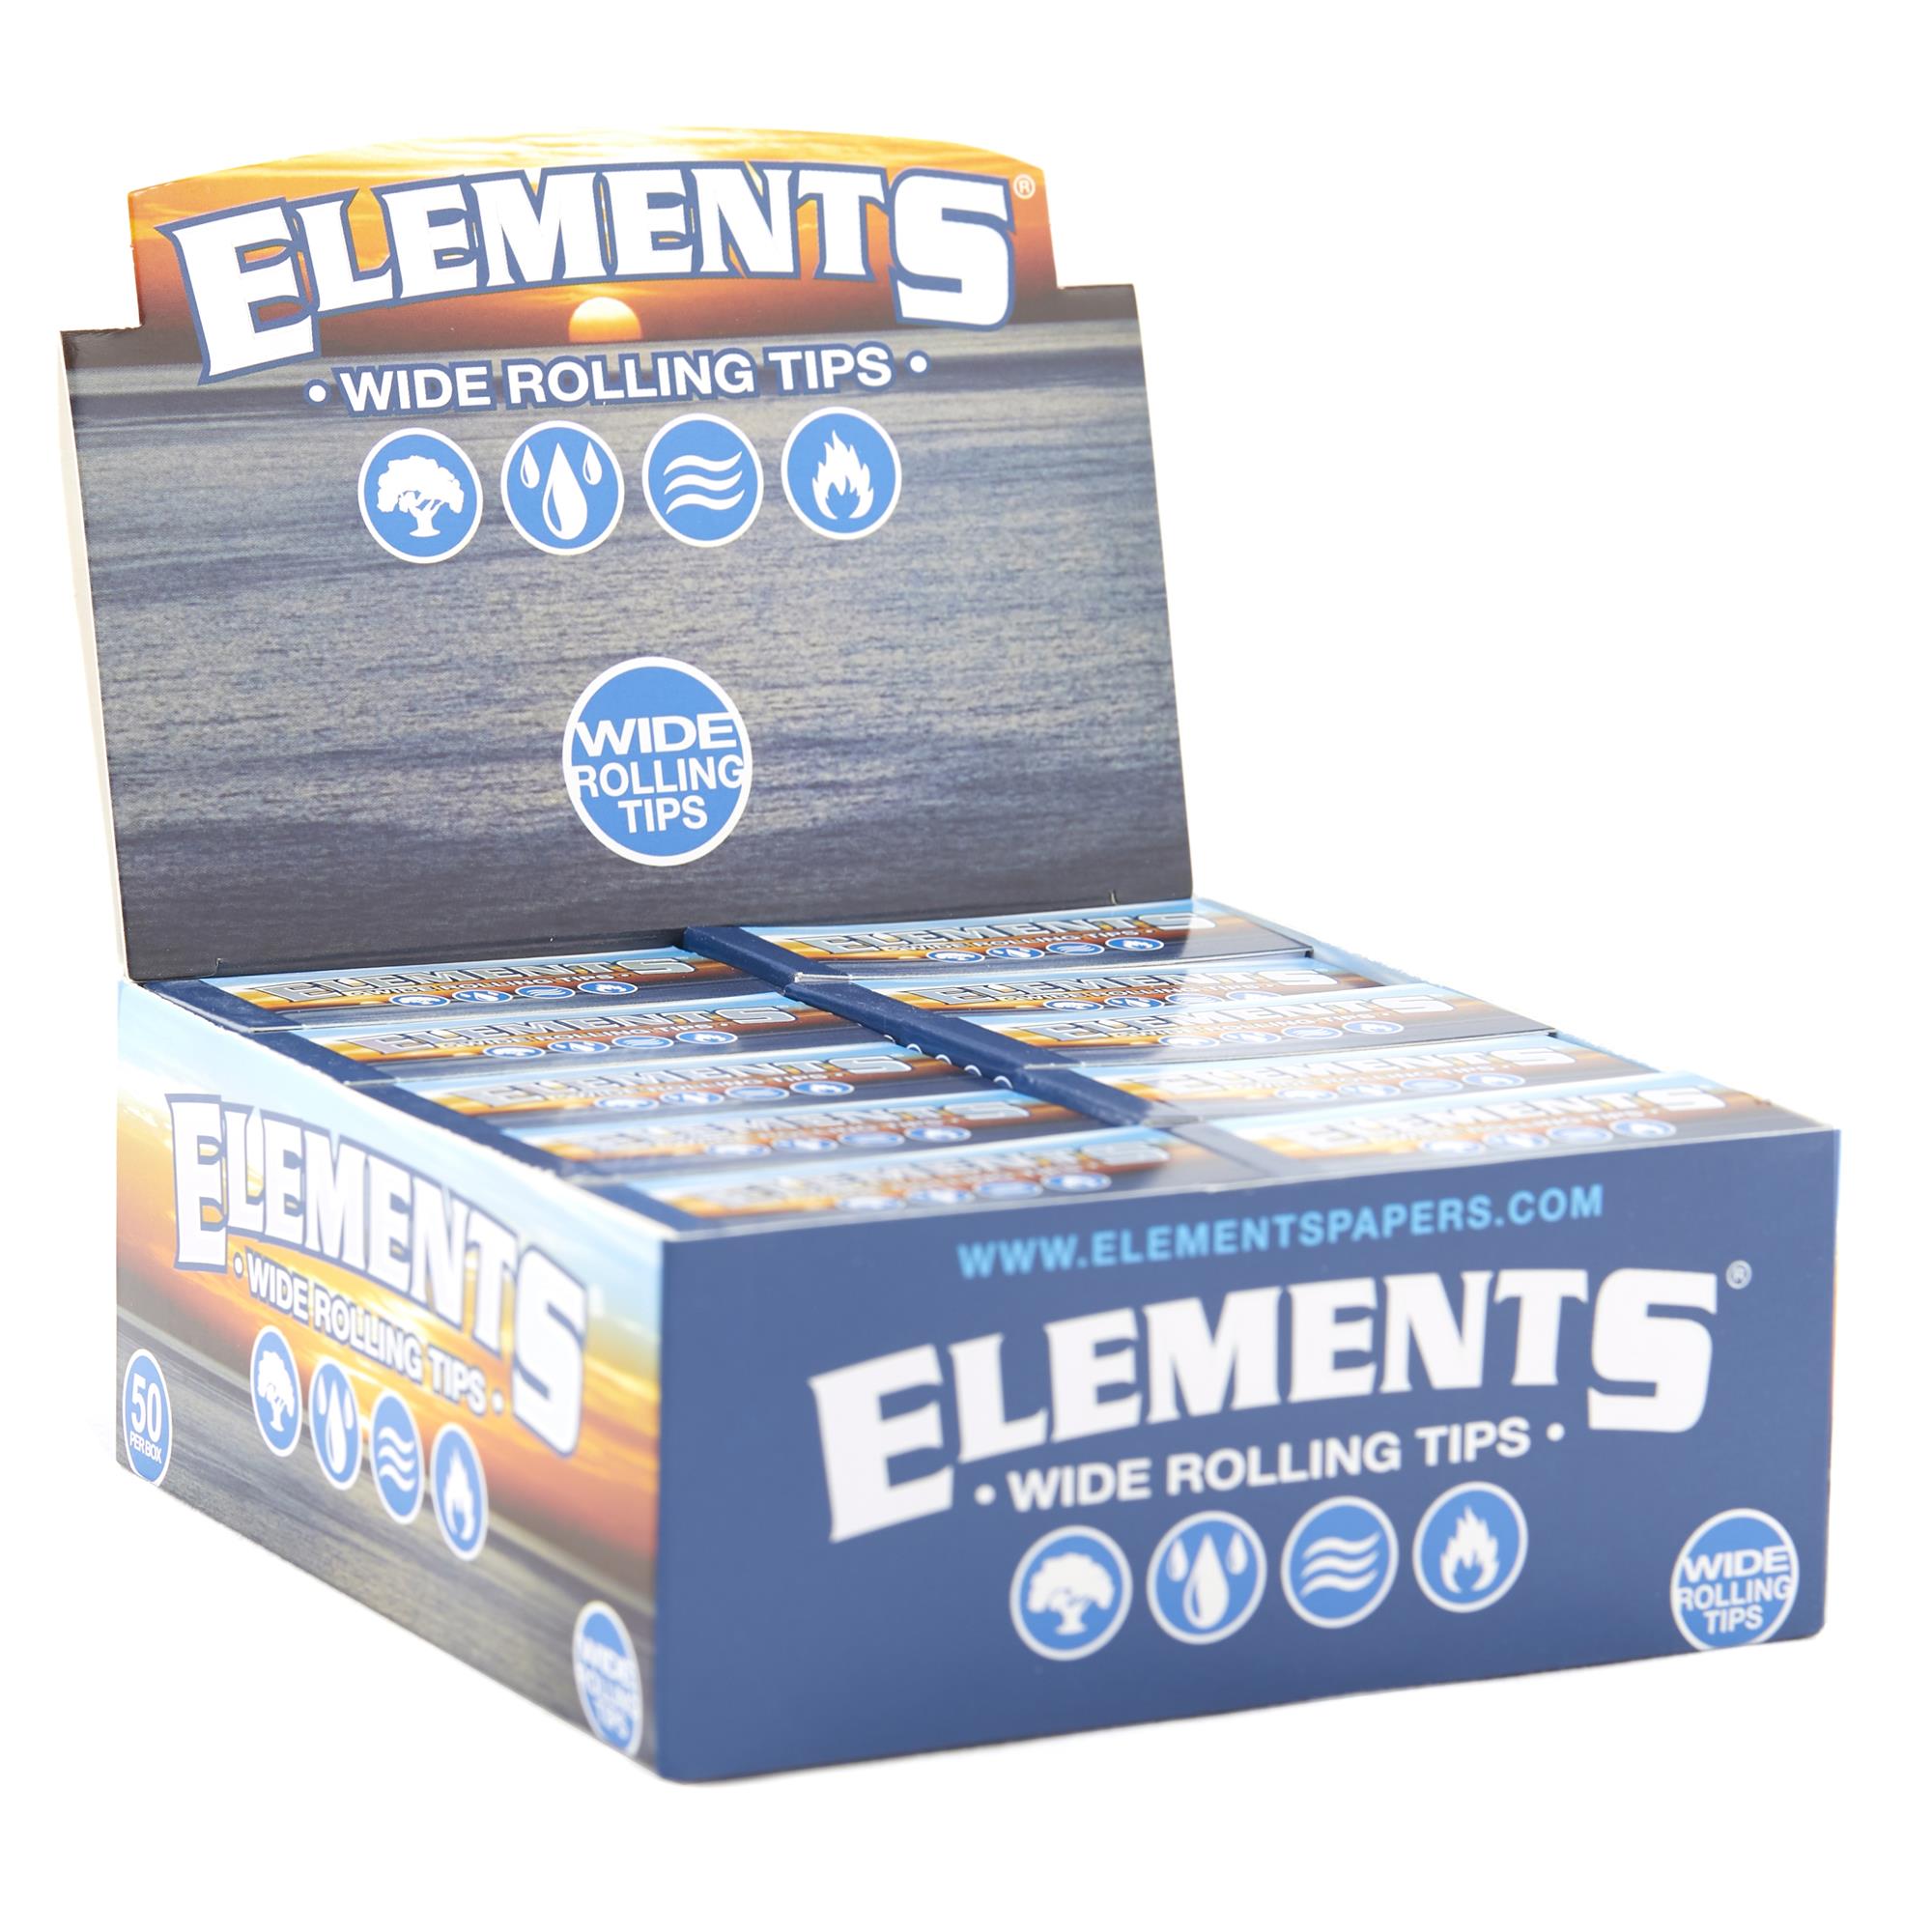 ELEMENTS TIPS WIDE